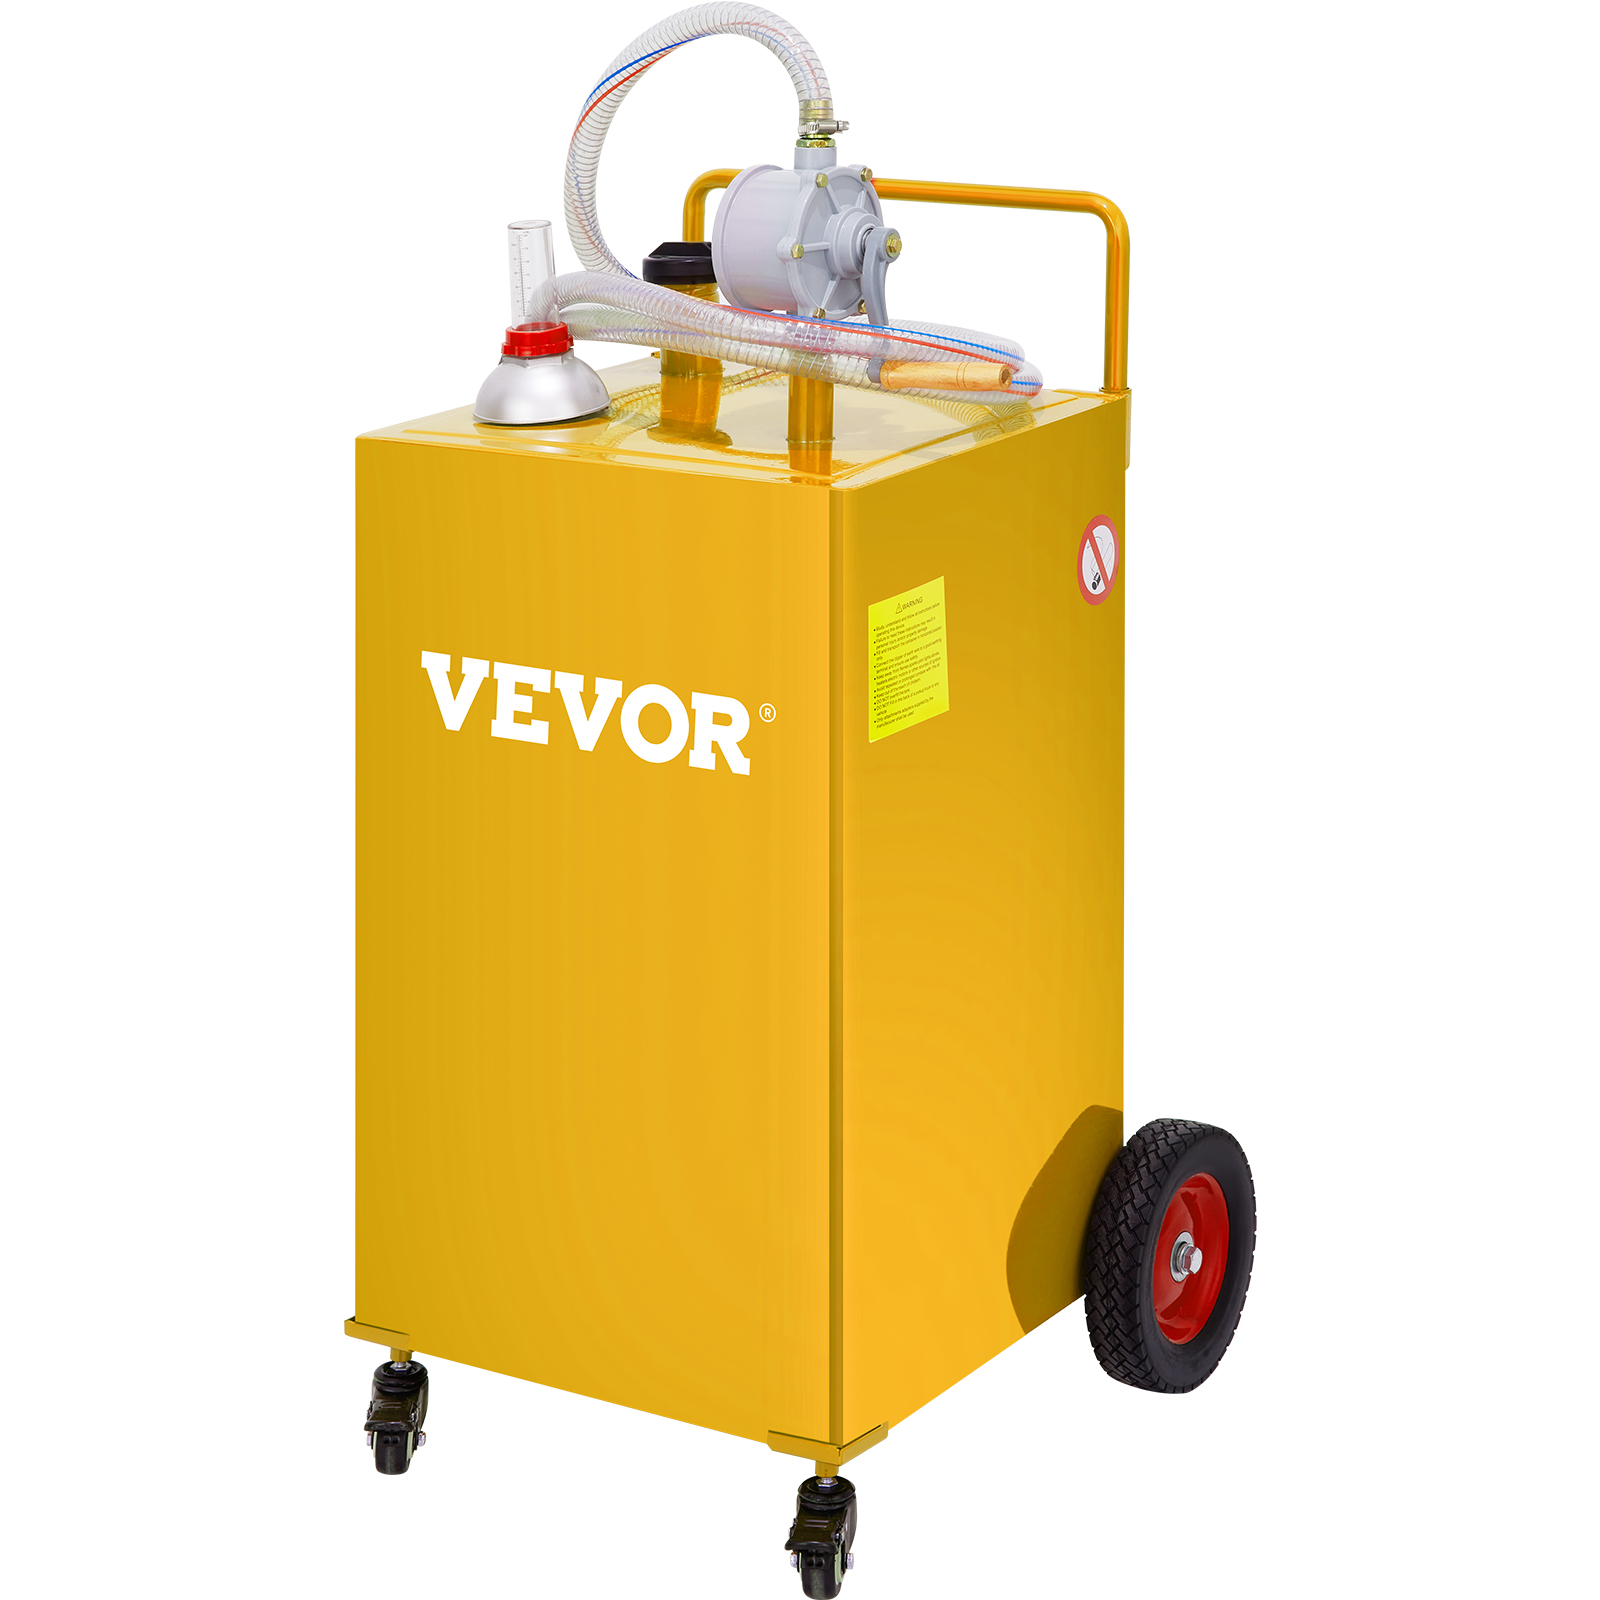 VEVOR Portable Diesel Tank, 58 Gallon Capacity & 10 GPM Flow Rate, Diesel  Fuel Tank with 12V Electric Transfer Pump and 13.1ft Rubber Hose, PE Diesel  Transfer Tank for Easy Fuel Transportation,Gary